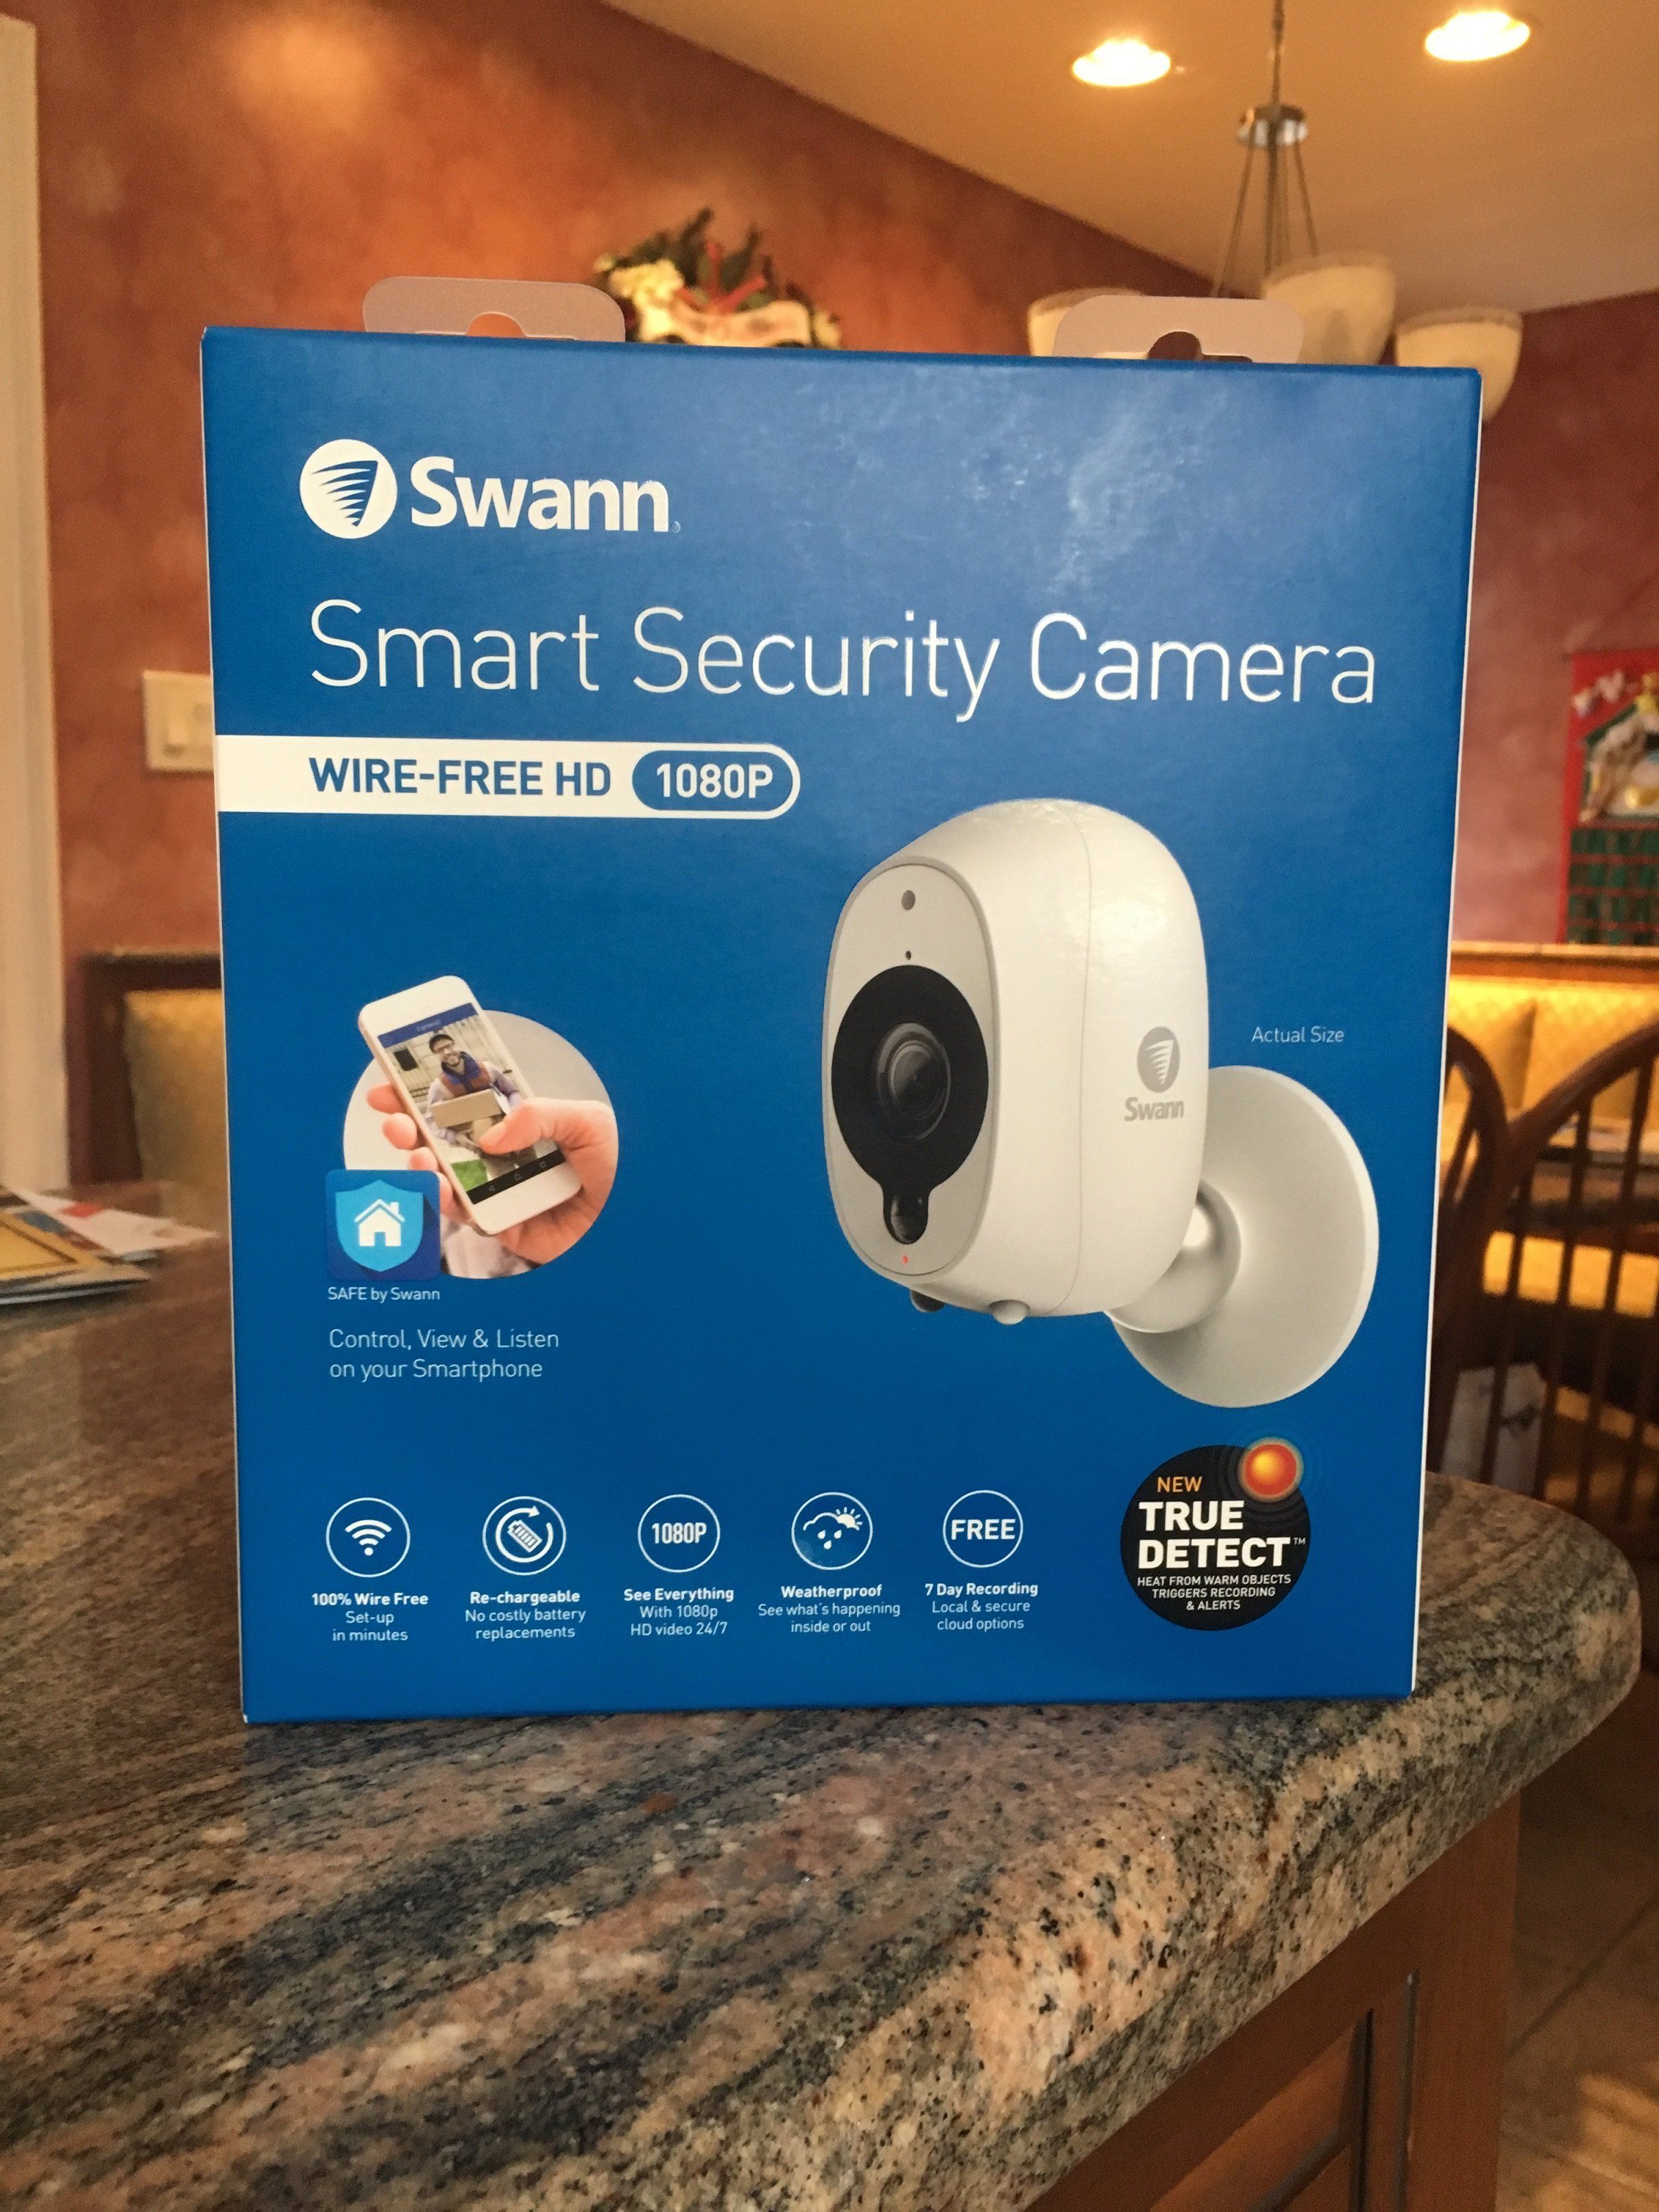 Behoefte aan anker lid Review: Swann Smart Security Camera with HD 1080p and Wi-Fi - Gearbrain